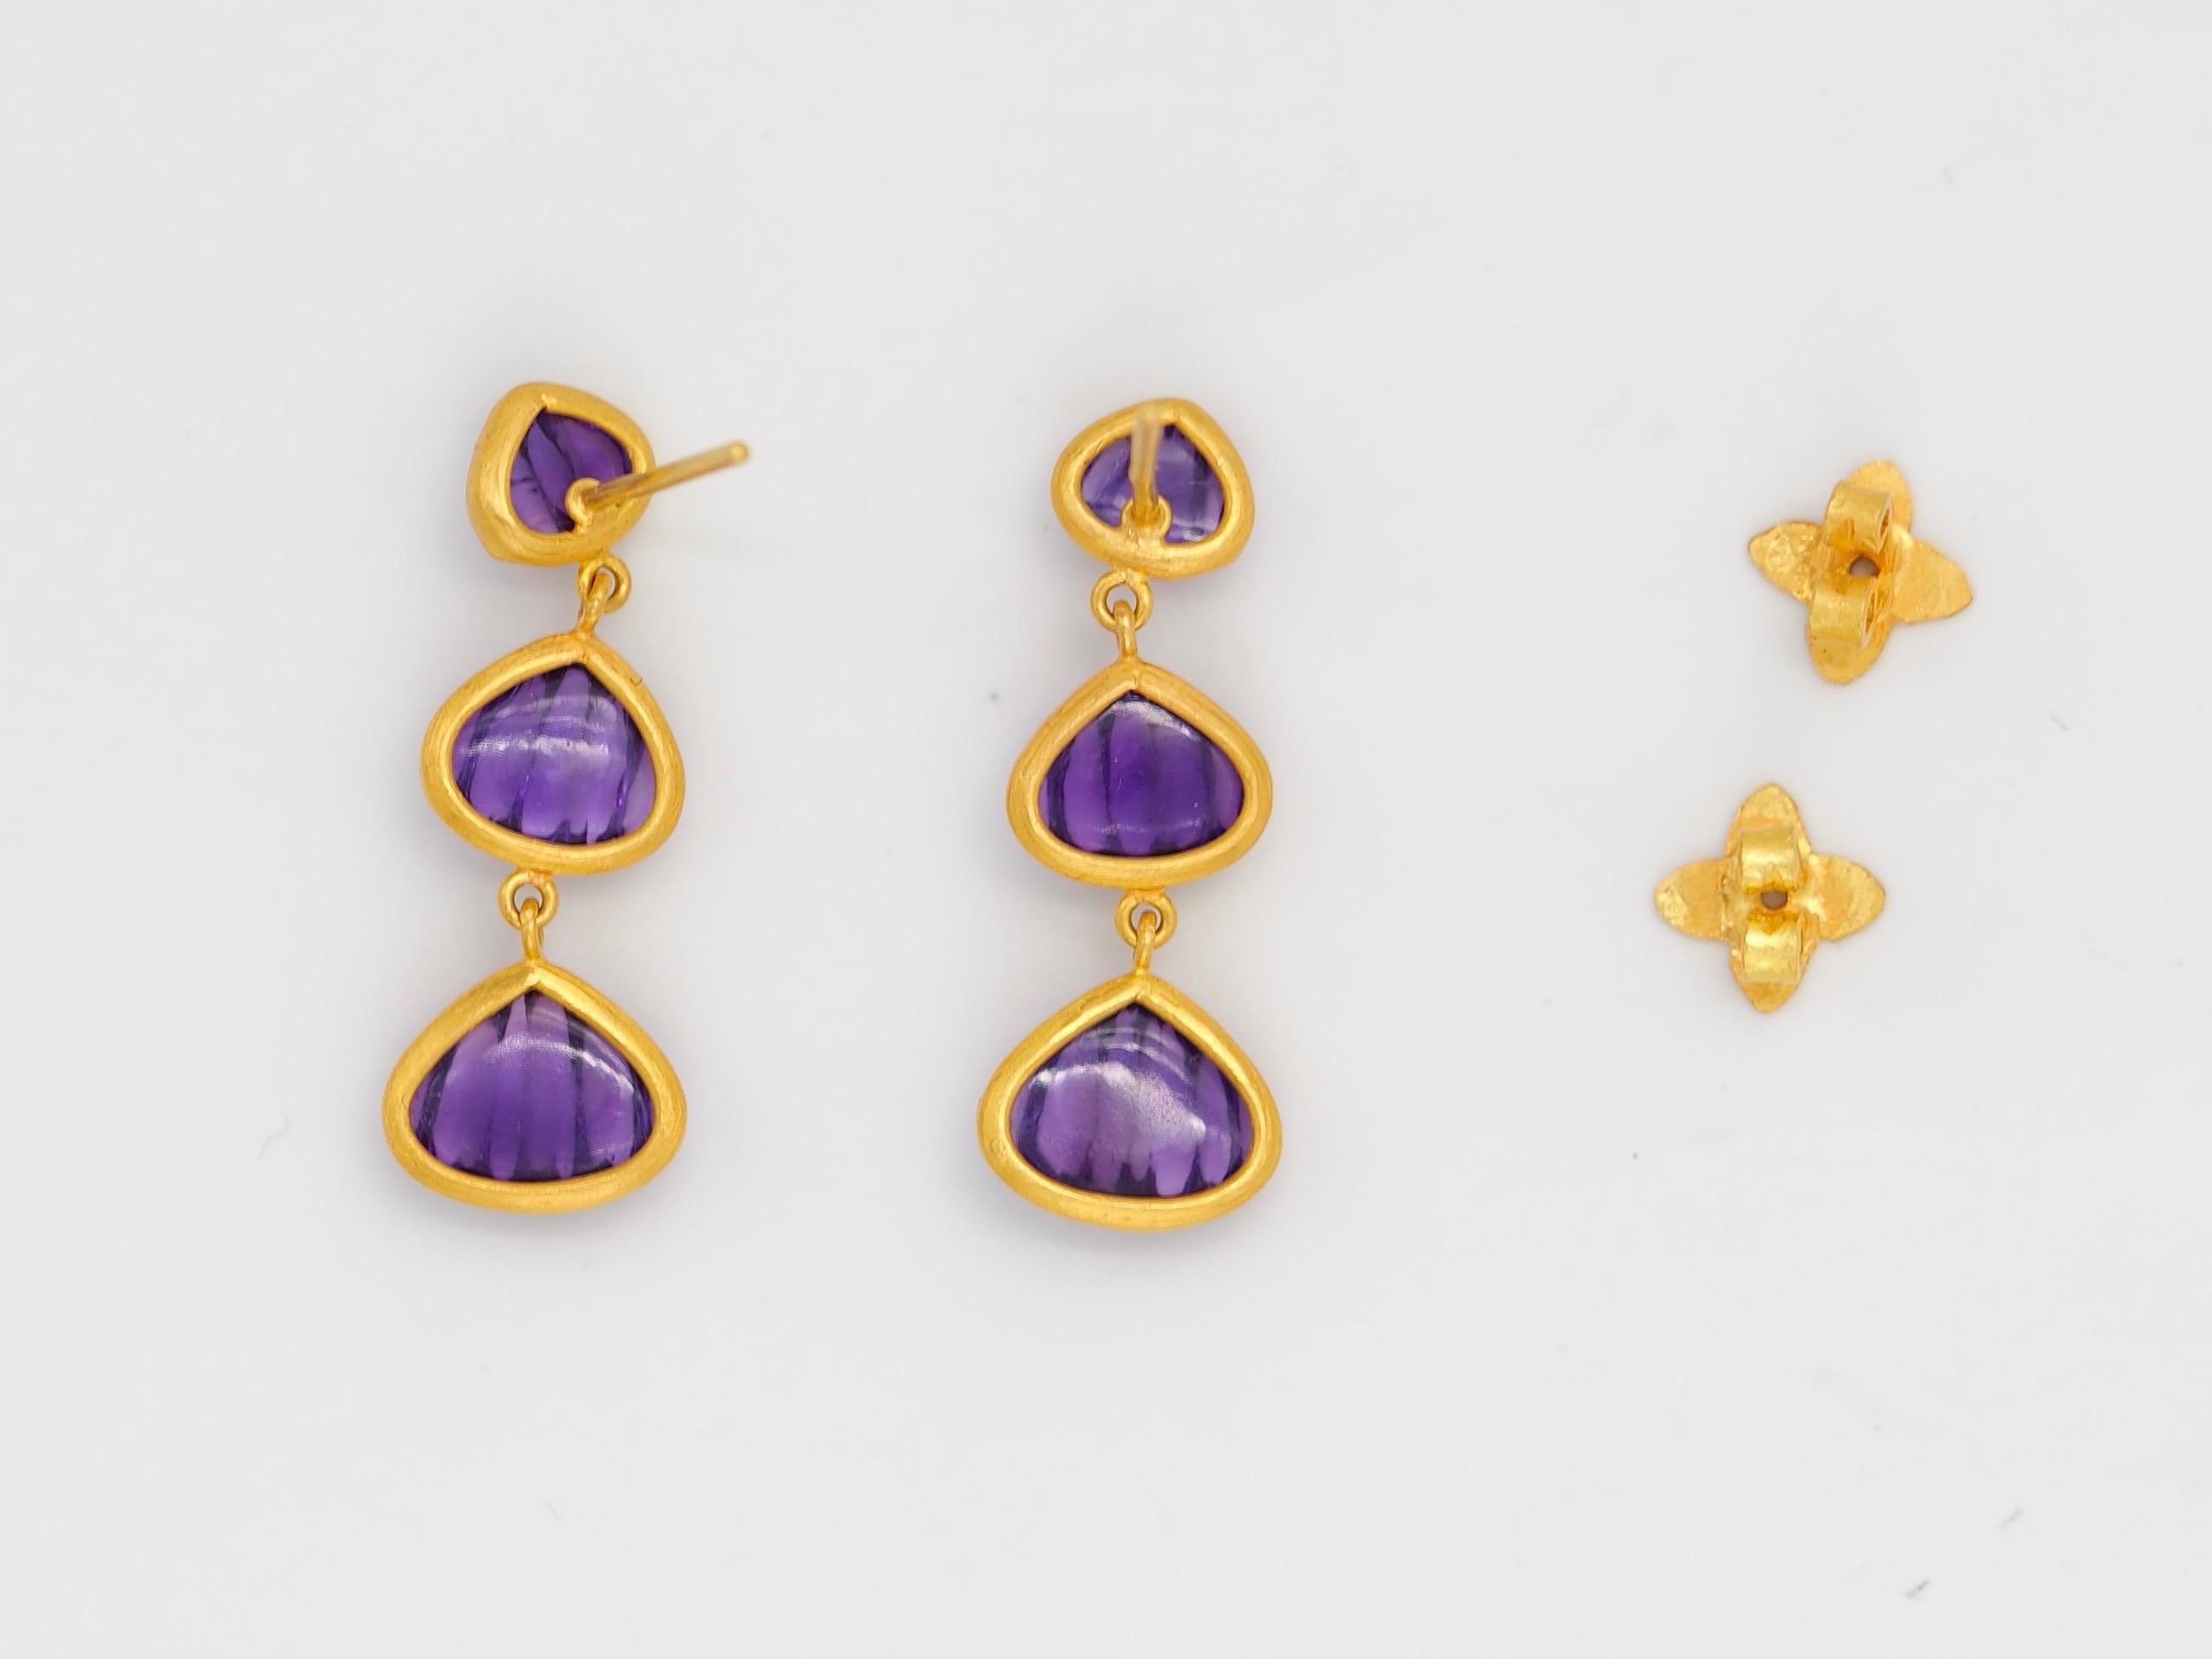 These earrings are composed of 6 amethysts for a total weight of 6 carats. The amethysts are hand-carved in the form of shells in 3 different sizes.
The shells are all set in 22 karat gold. The earrings are with a gold push / stud.
The earrings